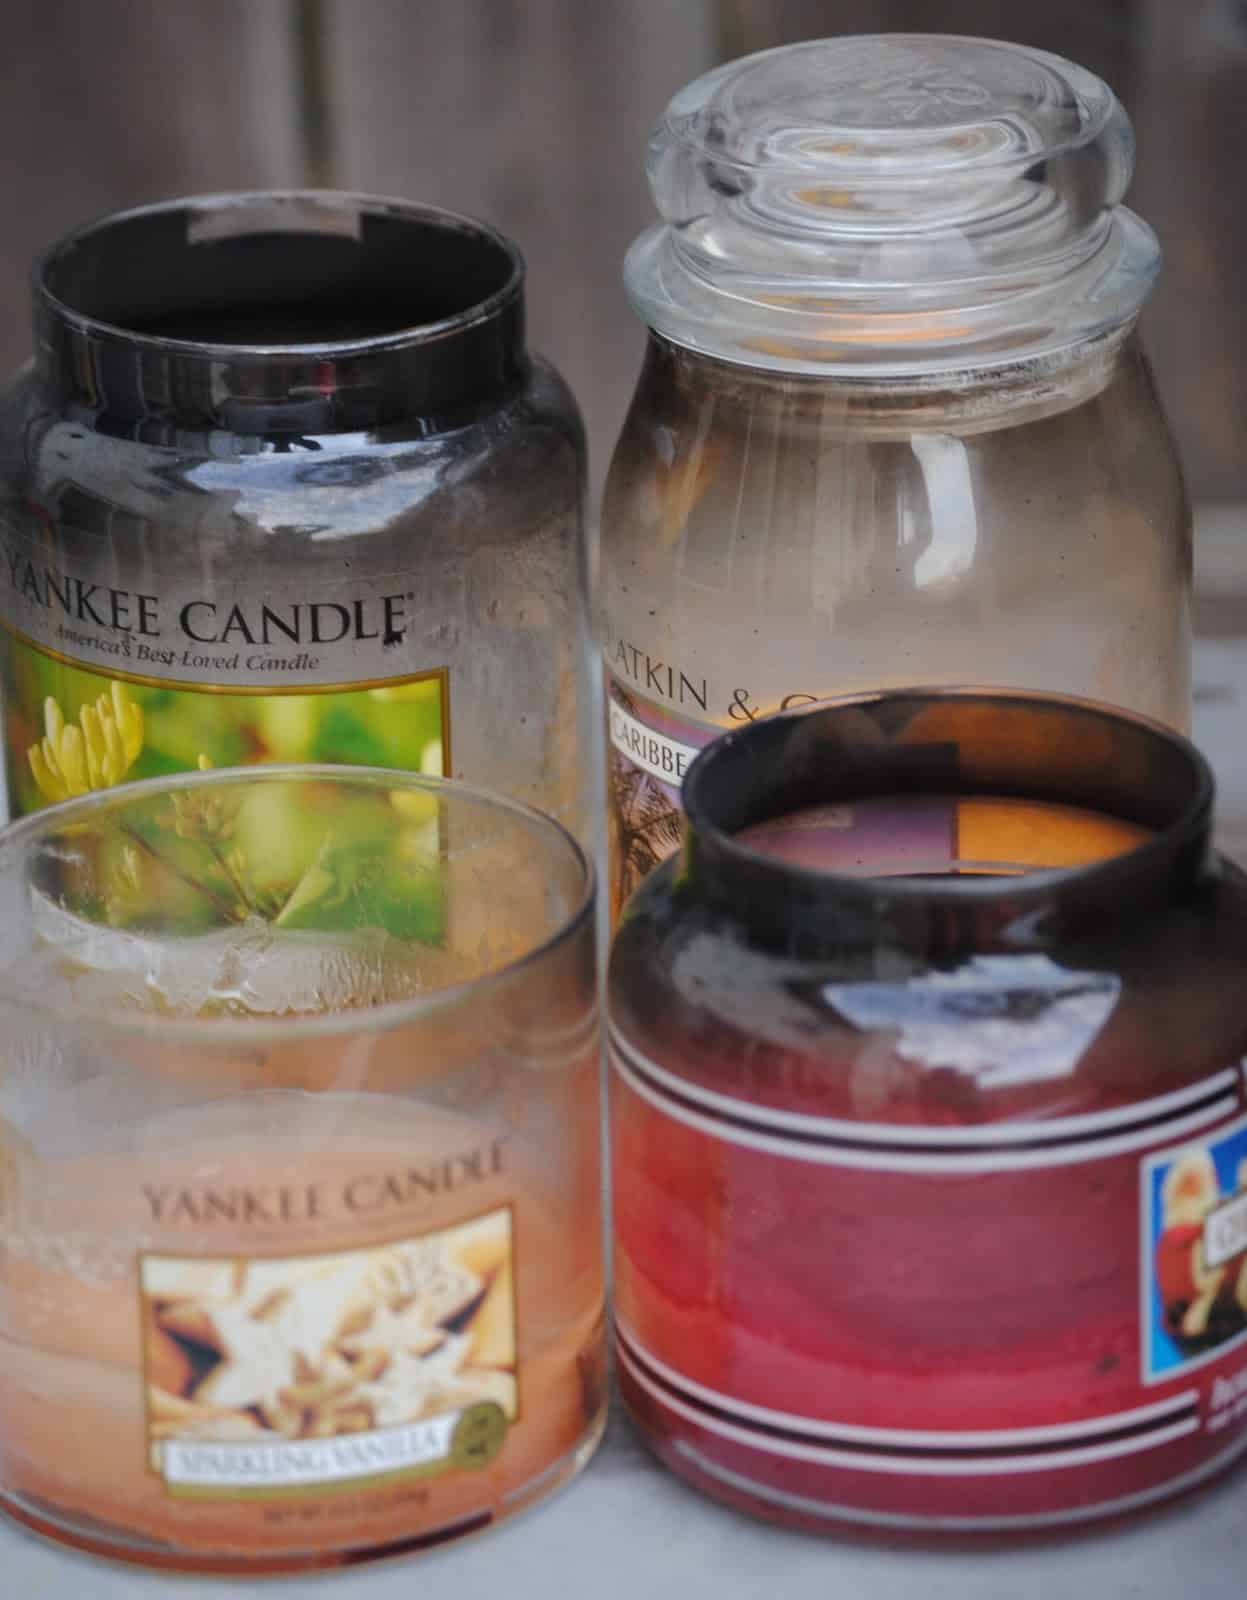 Old candle ends into layered candles